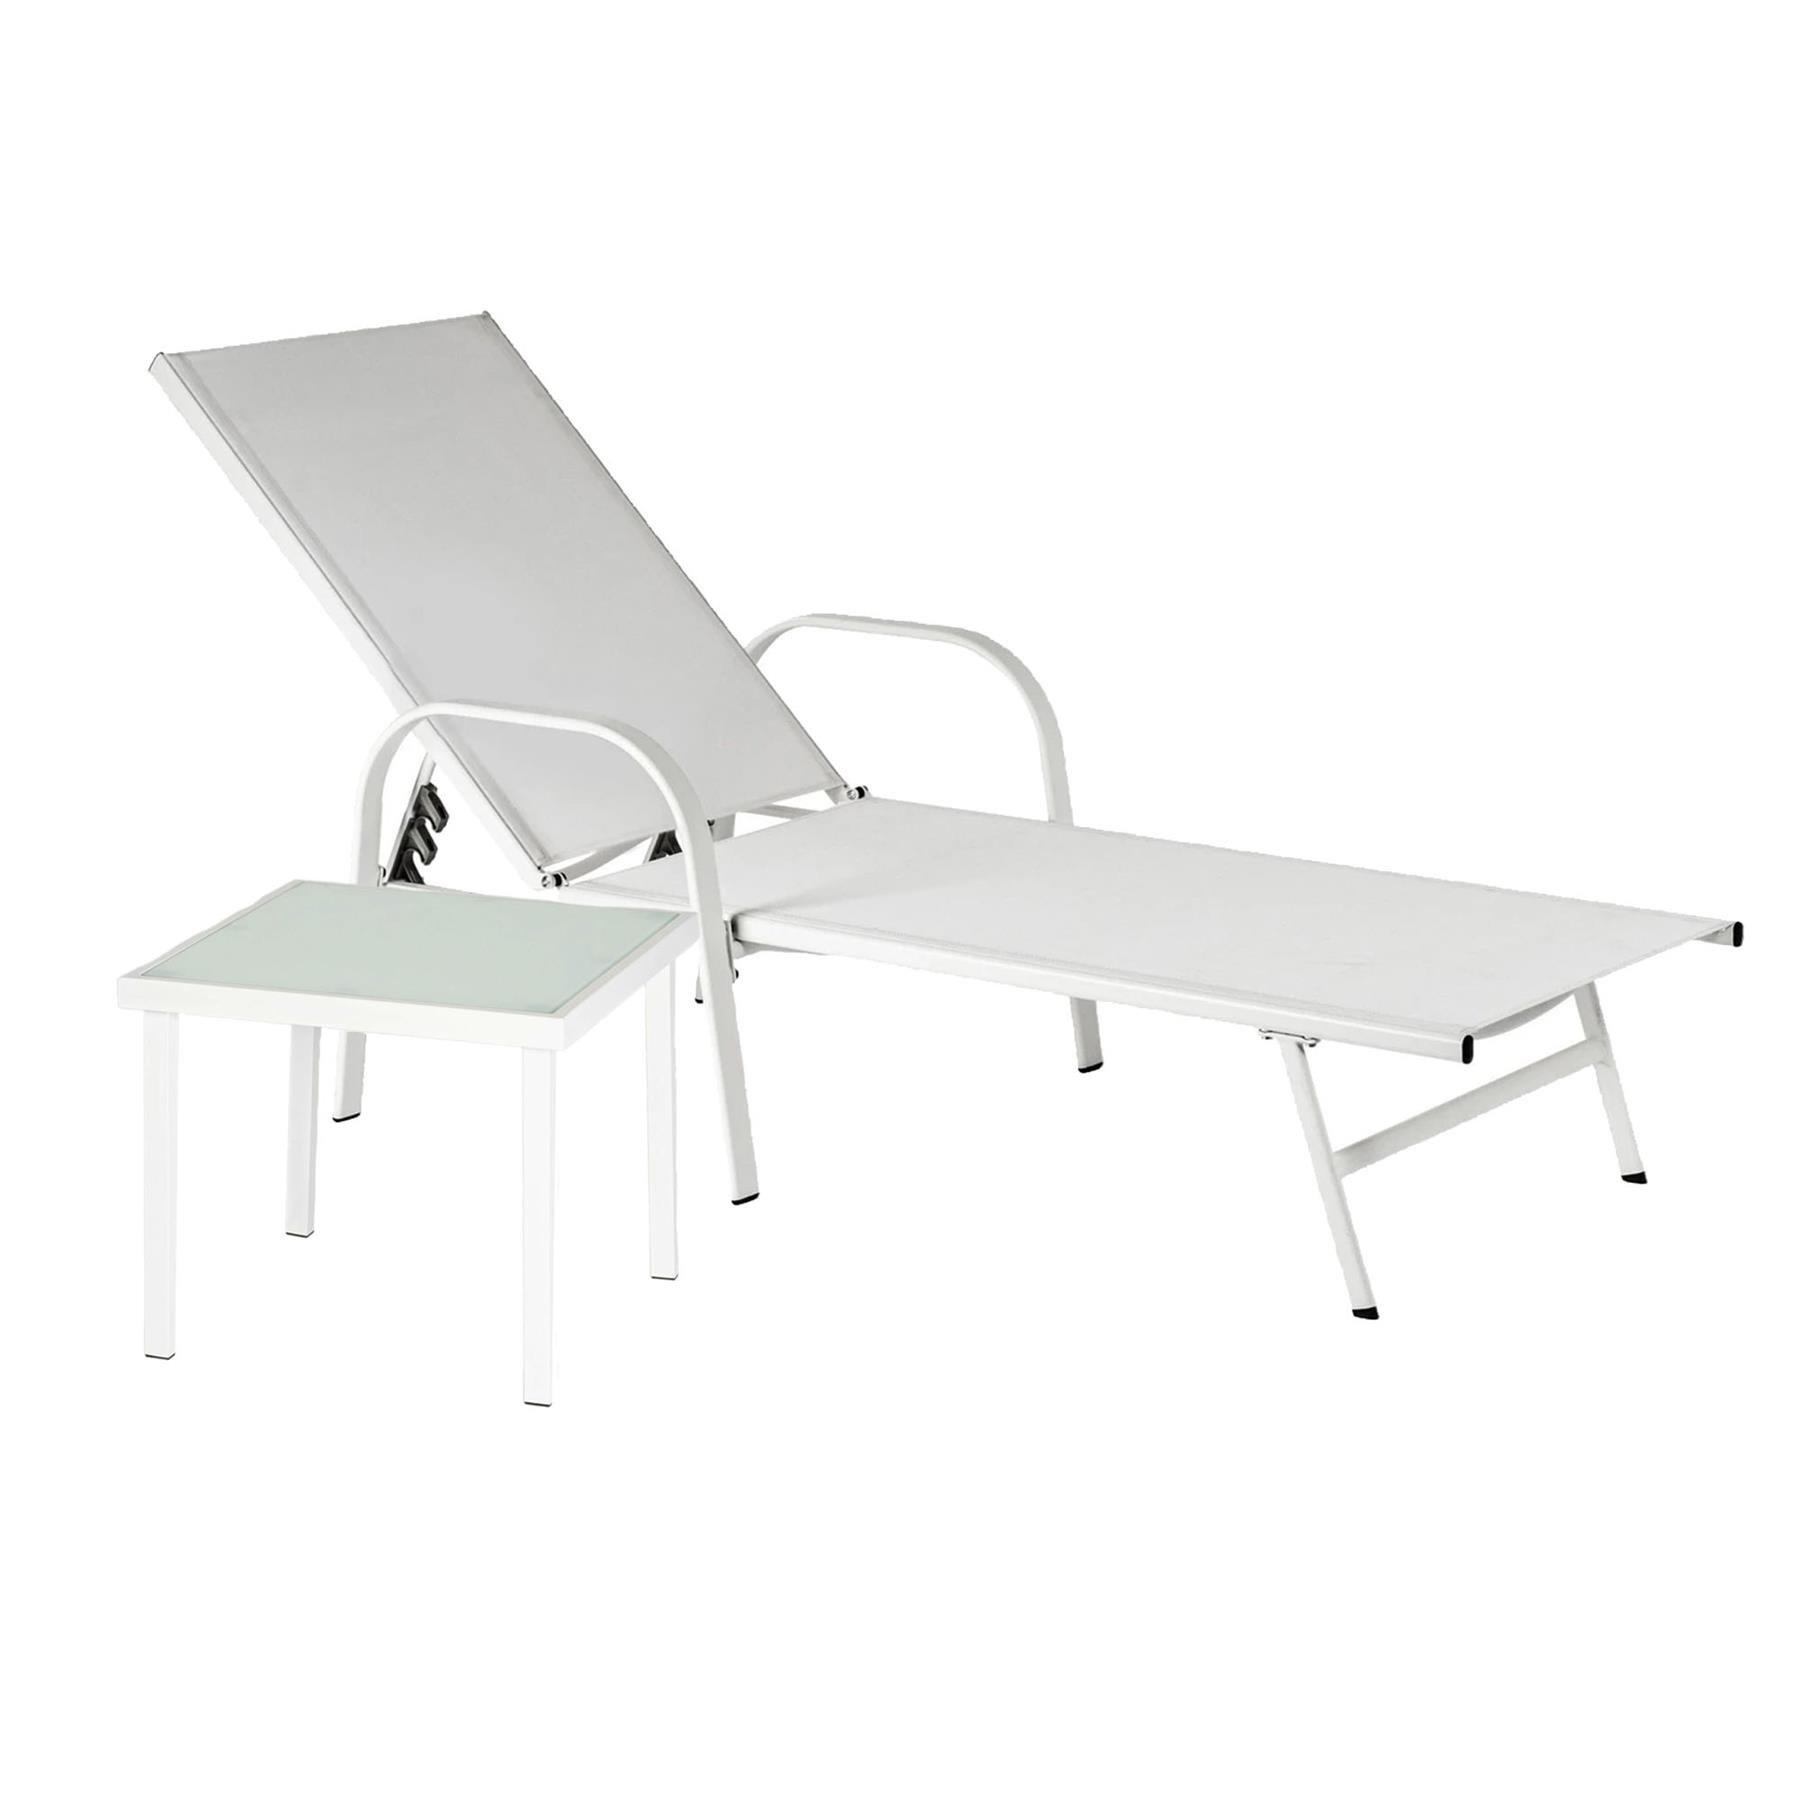 Sussex Sun Lounger and Side Table Set